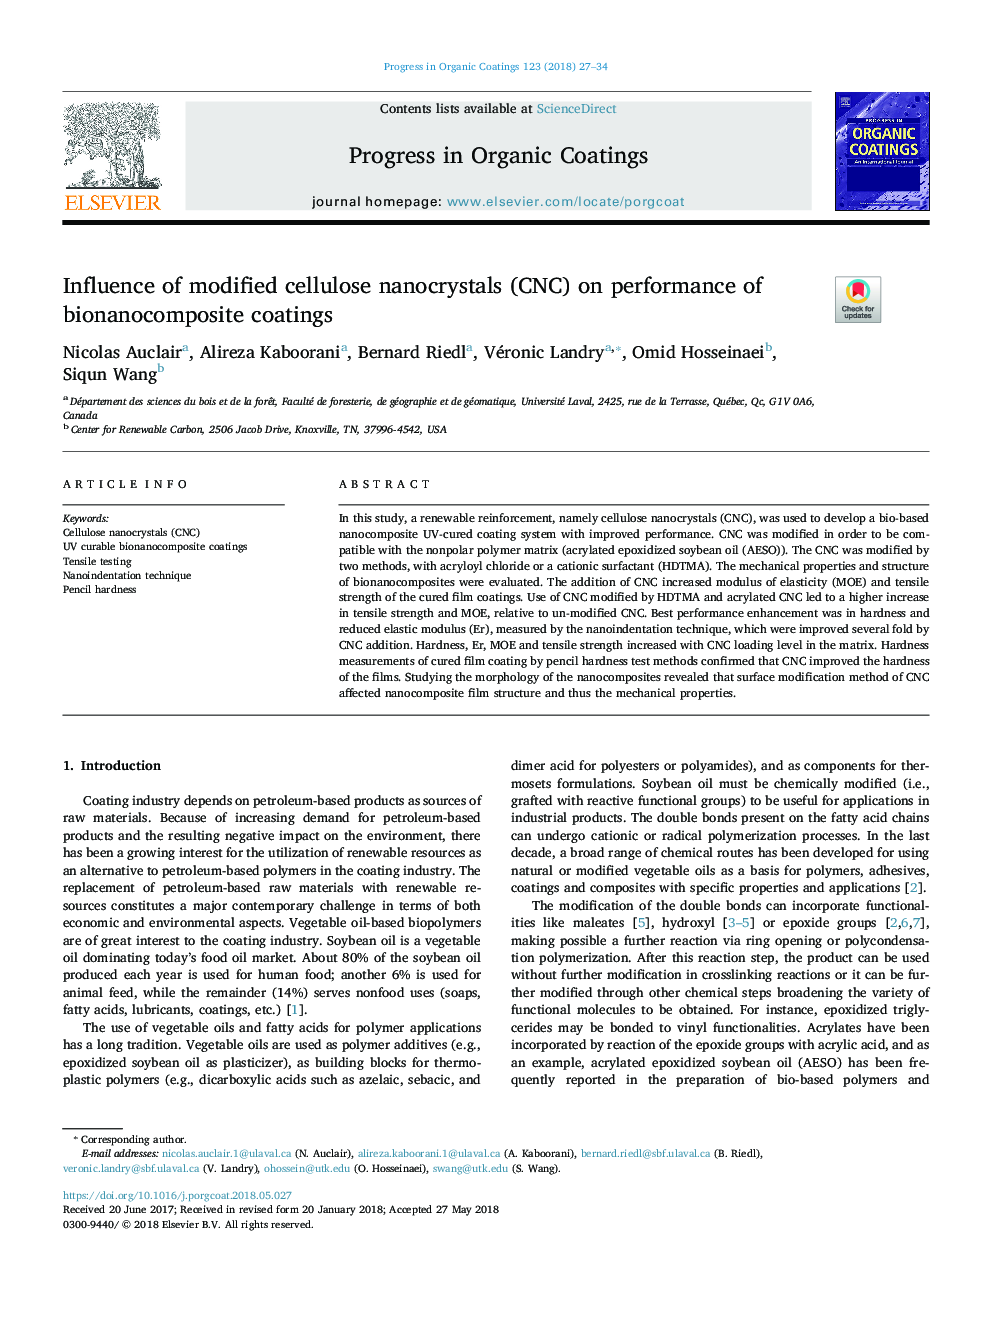 Influence of modified cellulose nanocrystals (CNC) on performance of bionanocomposite coatings